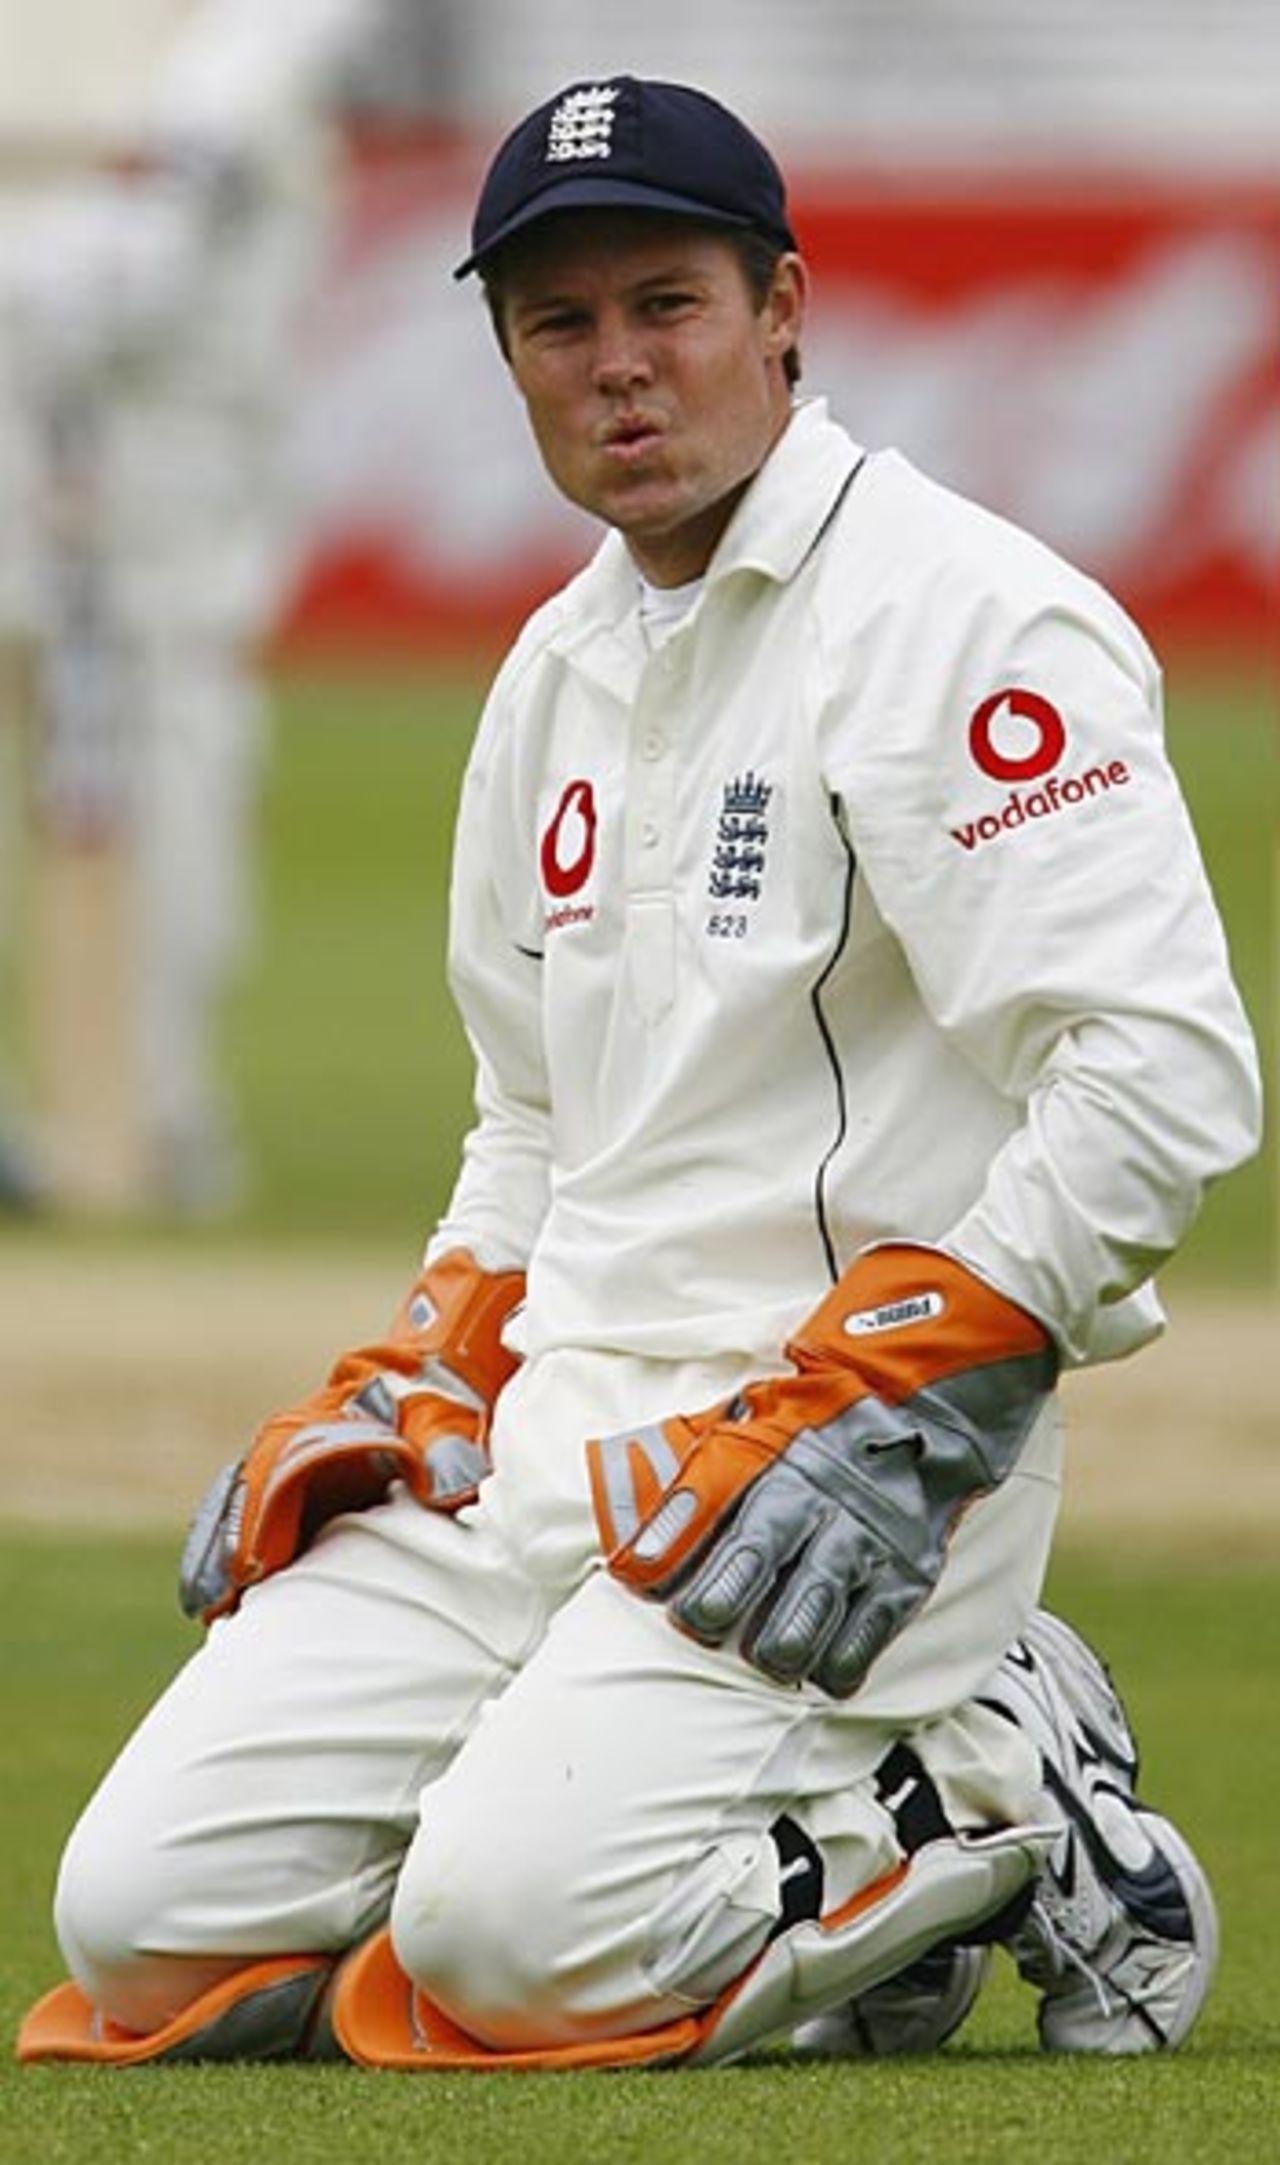 Geraint Jones rues one of several missed chances by England on the final day, England v Sri Lanka, 1st Test, Lord's, May 15, 2006